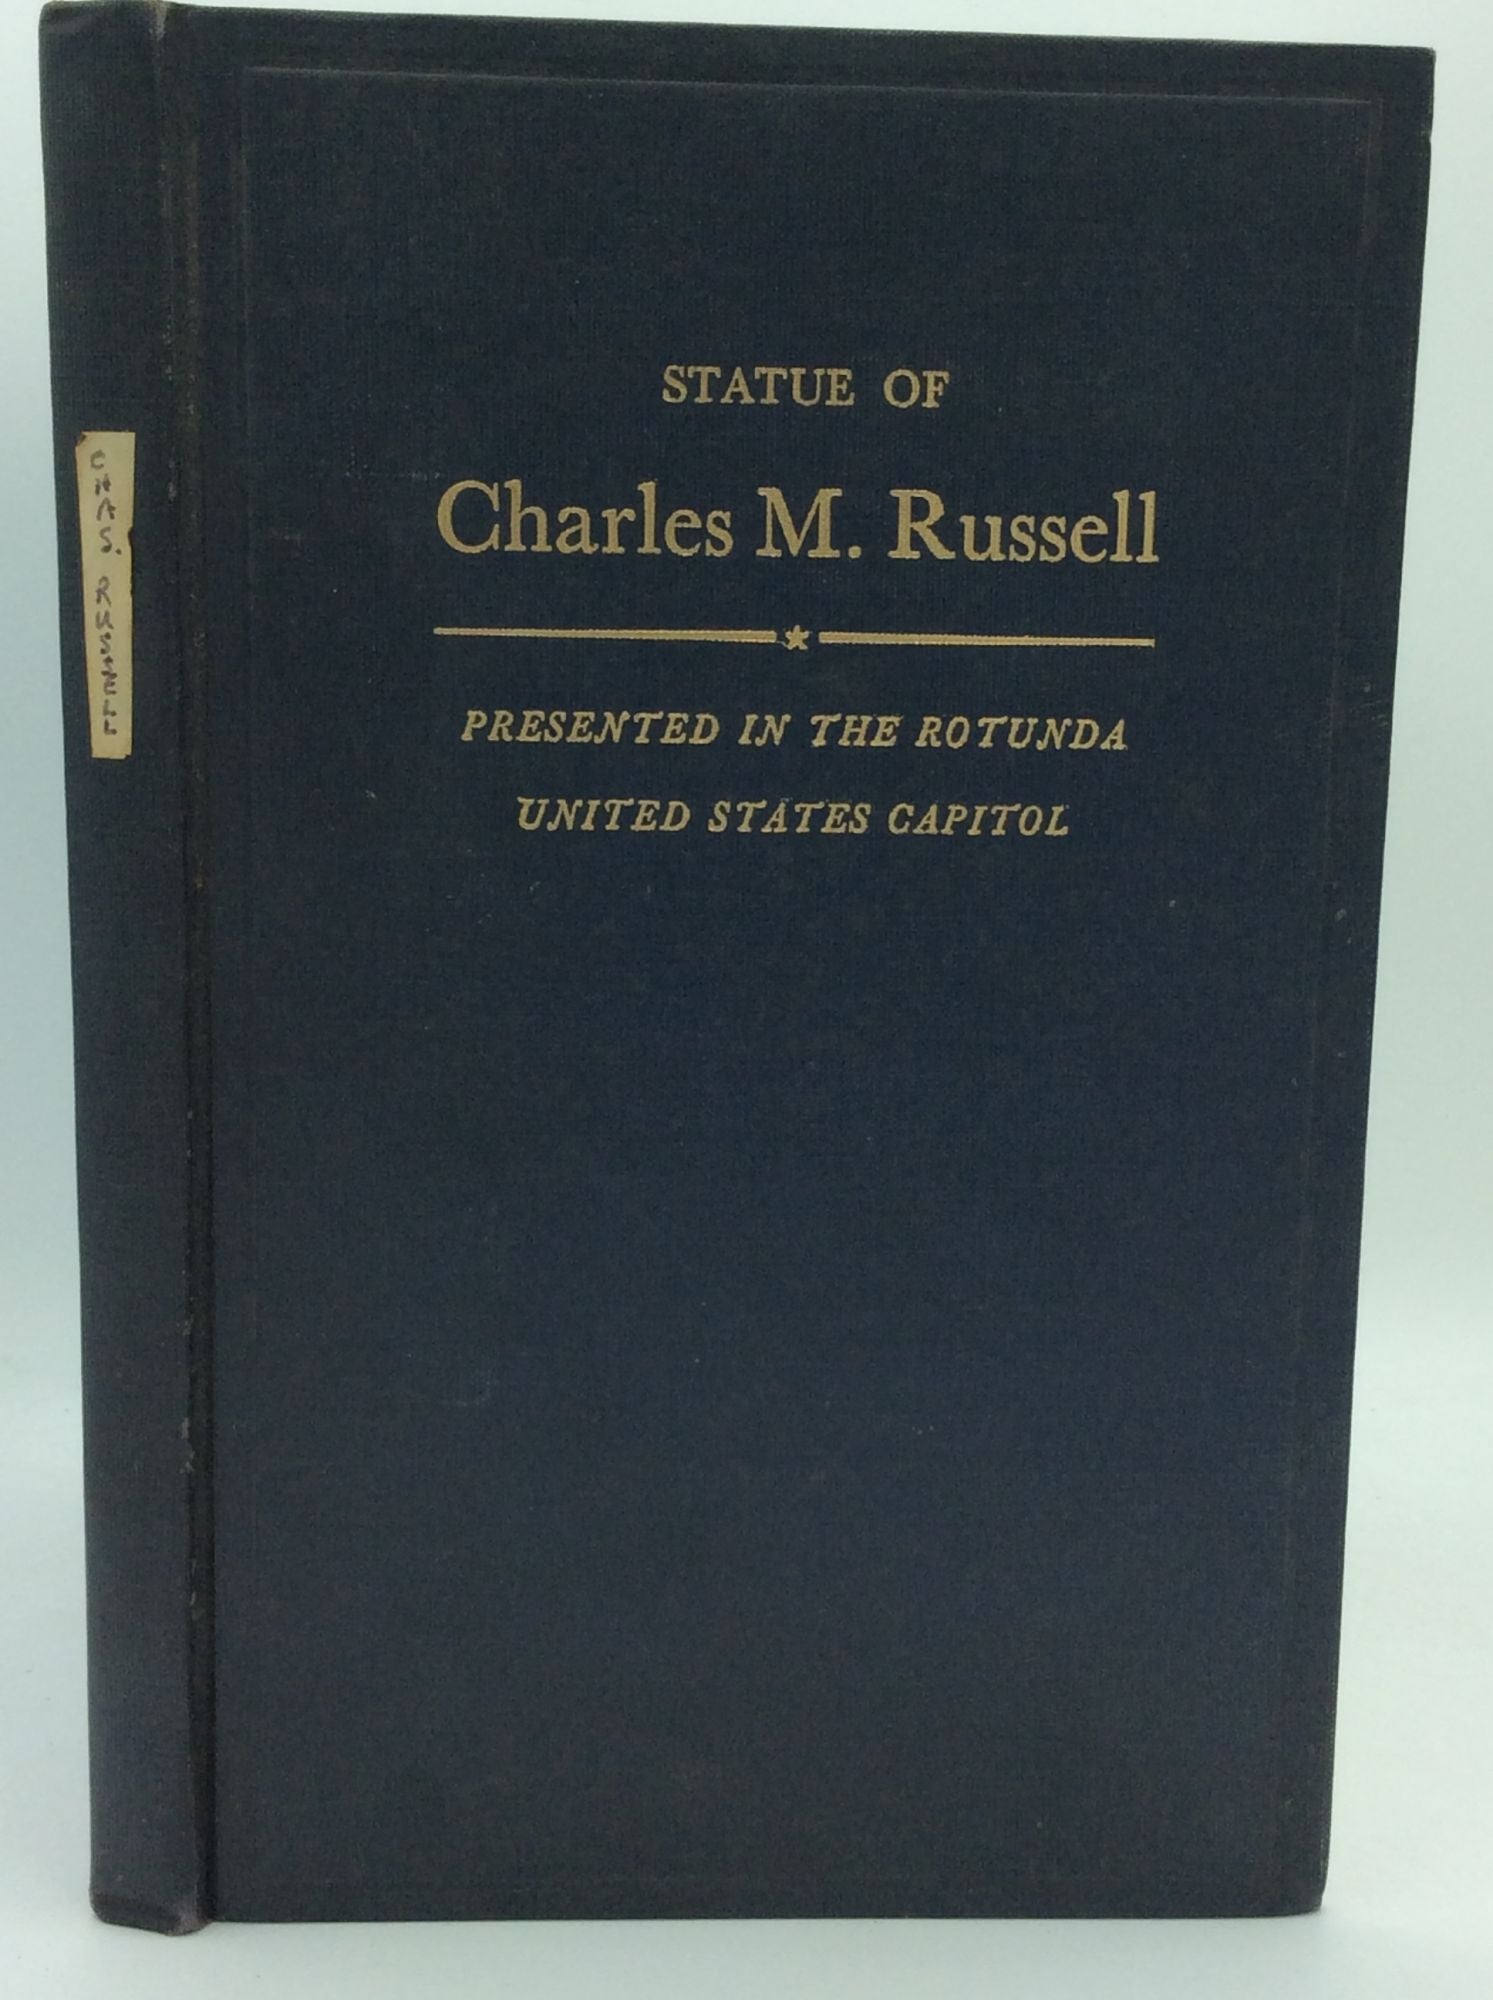  - Acceptance of the Statue of Charles M. Russell Presented by the State of Montana: Proceedings in the Congress and in the Rotunda, United States Capitol